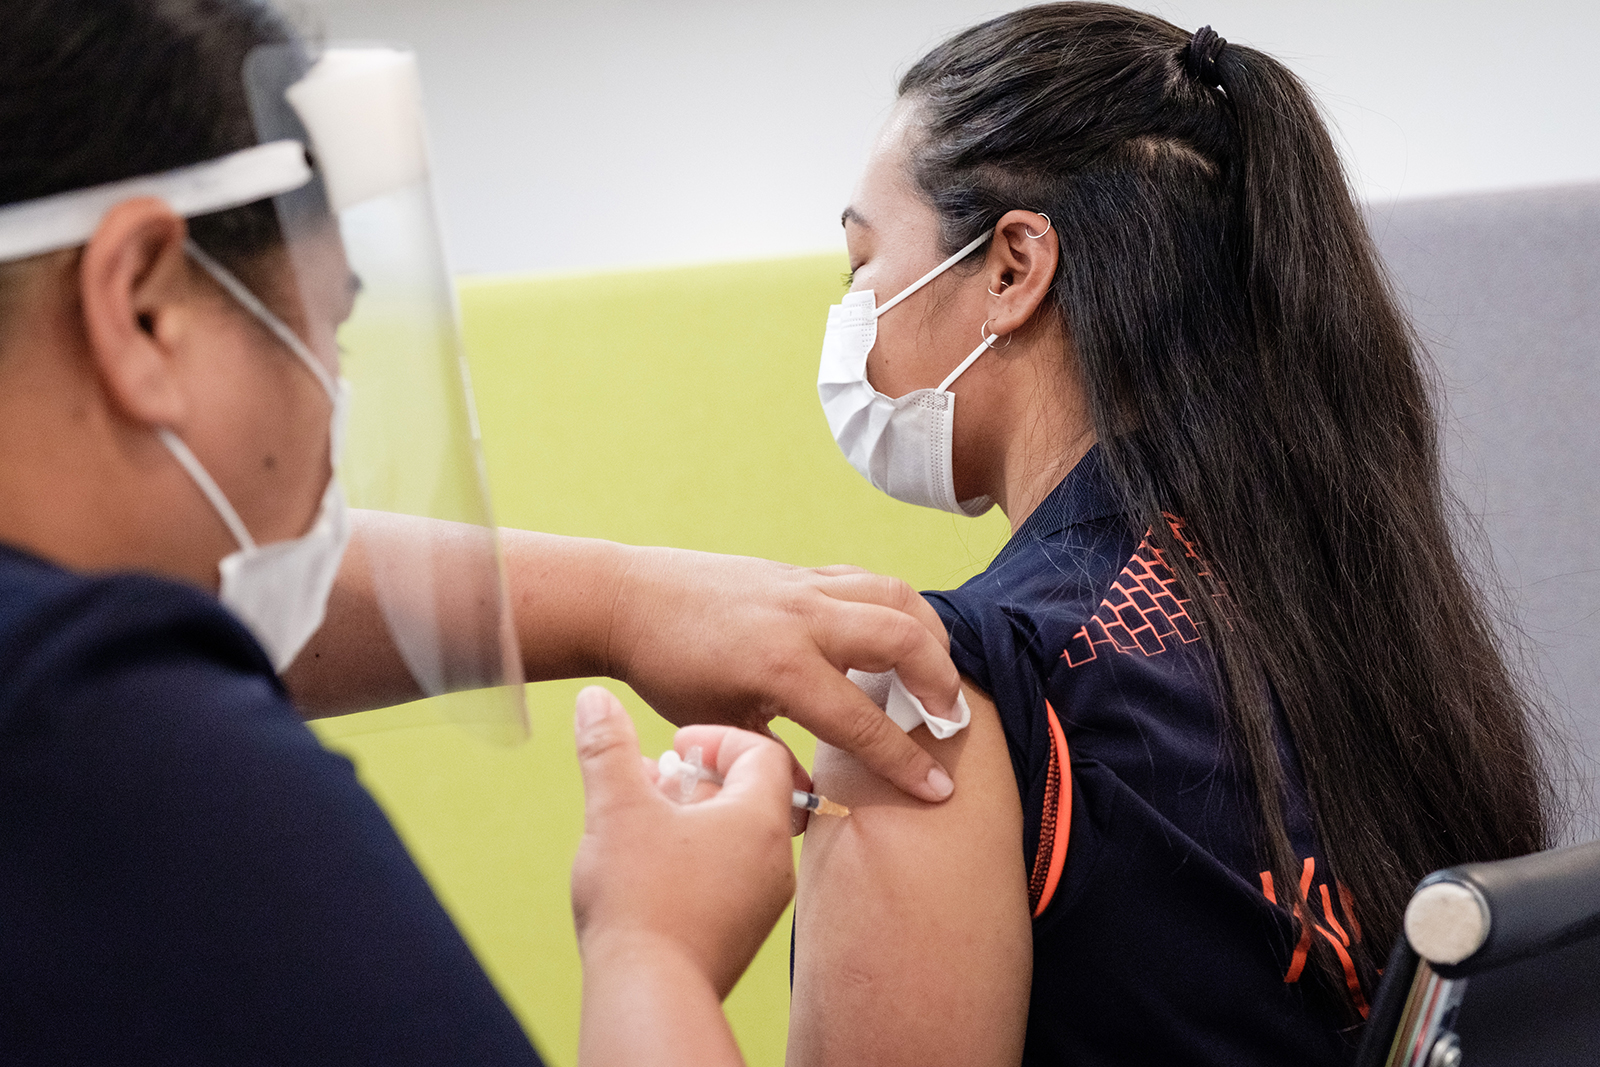  A border worker receives a dose of the Covid-19 vaccine in Auckland, New Zealand, on February 20.